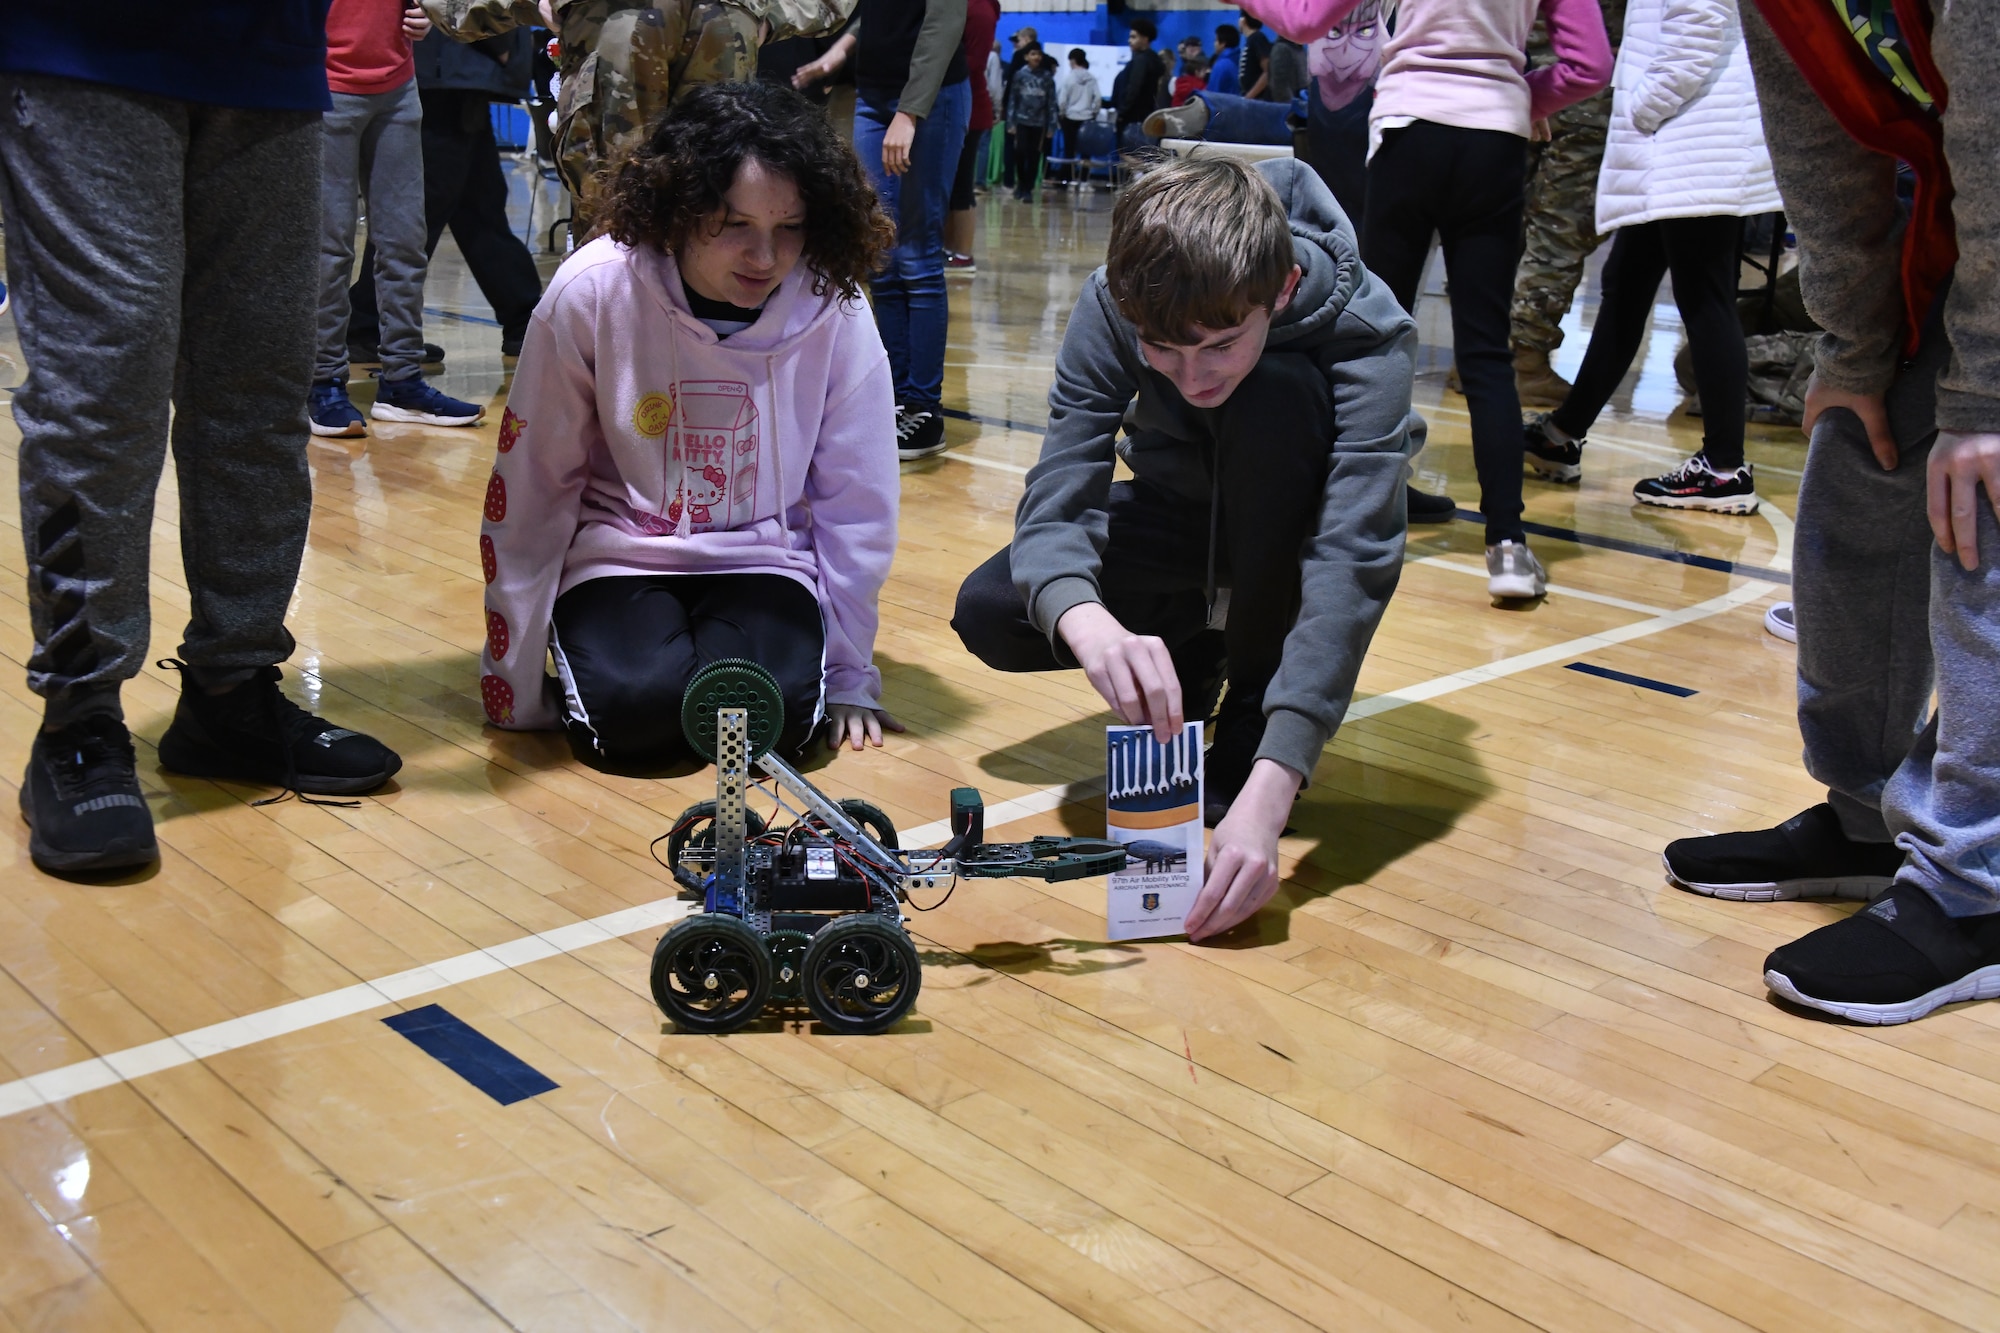 Students from Altus Junior High School play with a robot provided by Altus Air Force Base’s (AAFB) Science, Technology, Engineering and Mathematics (STEM) Council at Altus High School, Altus, Oklahoma, March 30, 2022. AAFB Airmen hosted a STEM fair for  approximately 1,100 local junior and high school students. (U.S. Air Force photo by Airman 1st Class Miyah Gray)